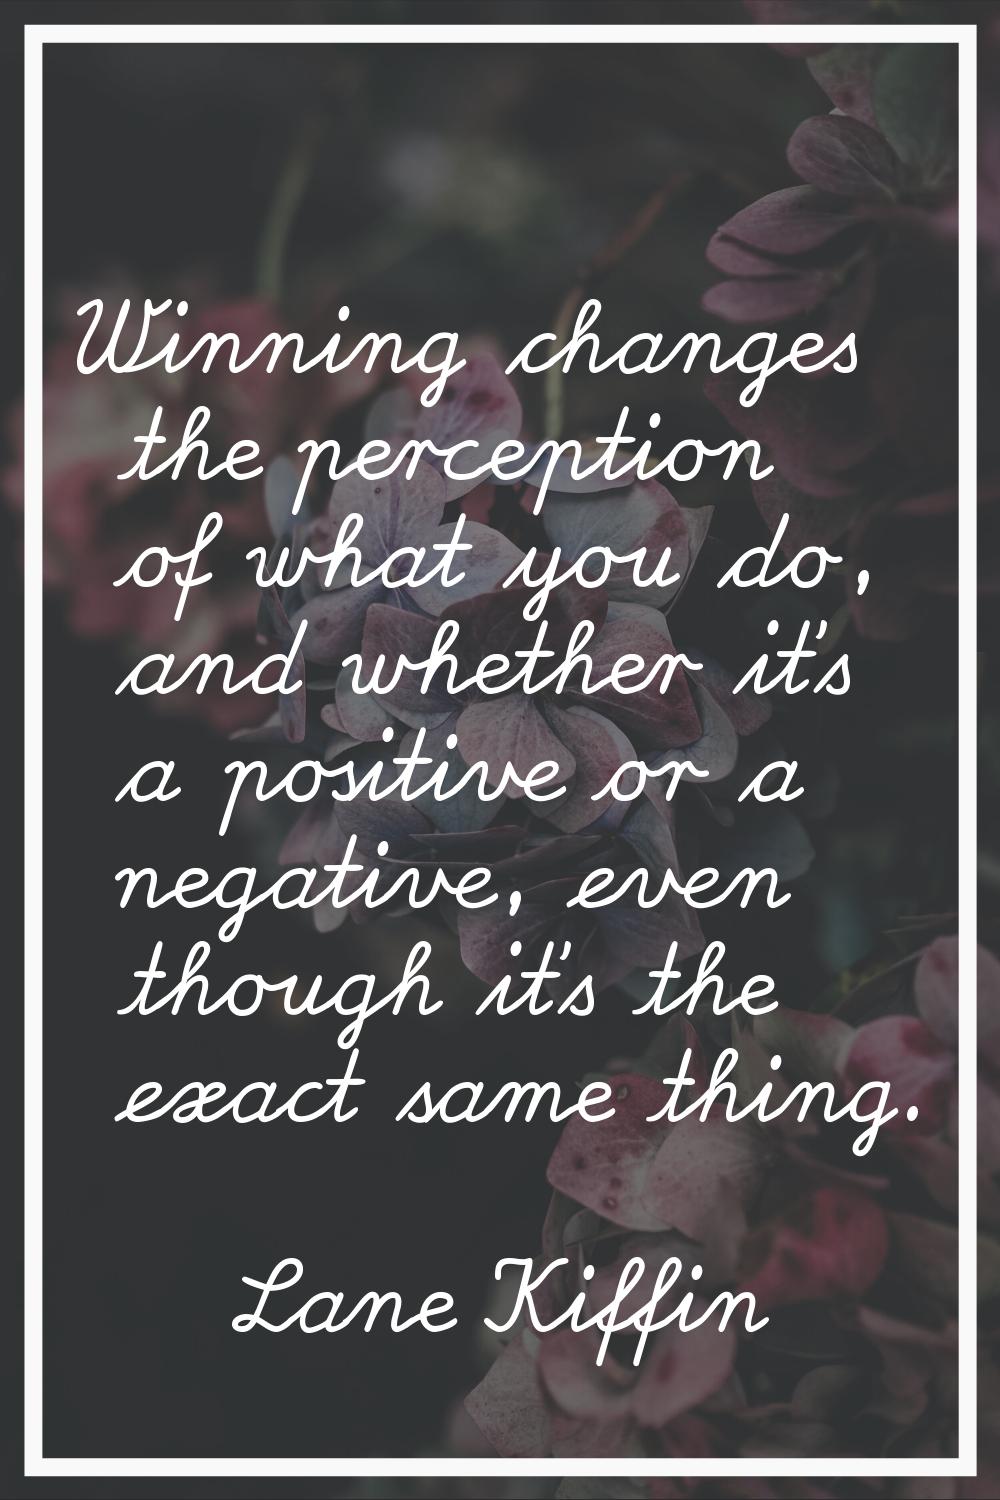 Winning changes the perception of what you do, and whether it's a positive or a negative, even thou